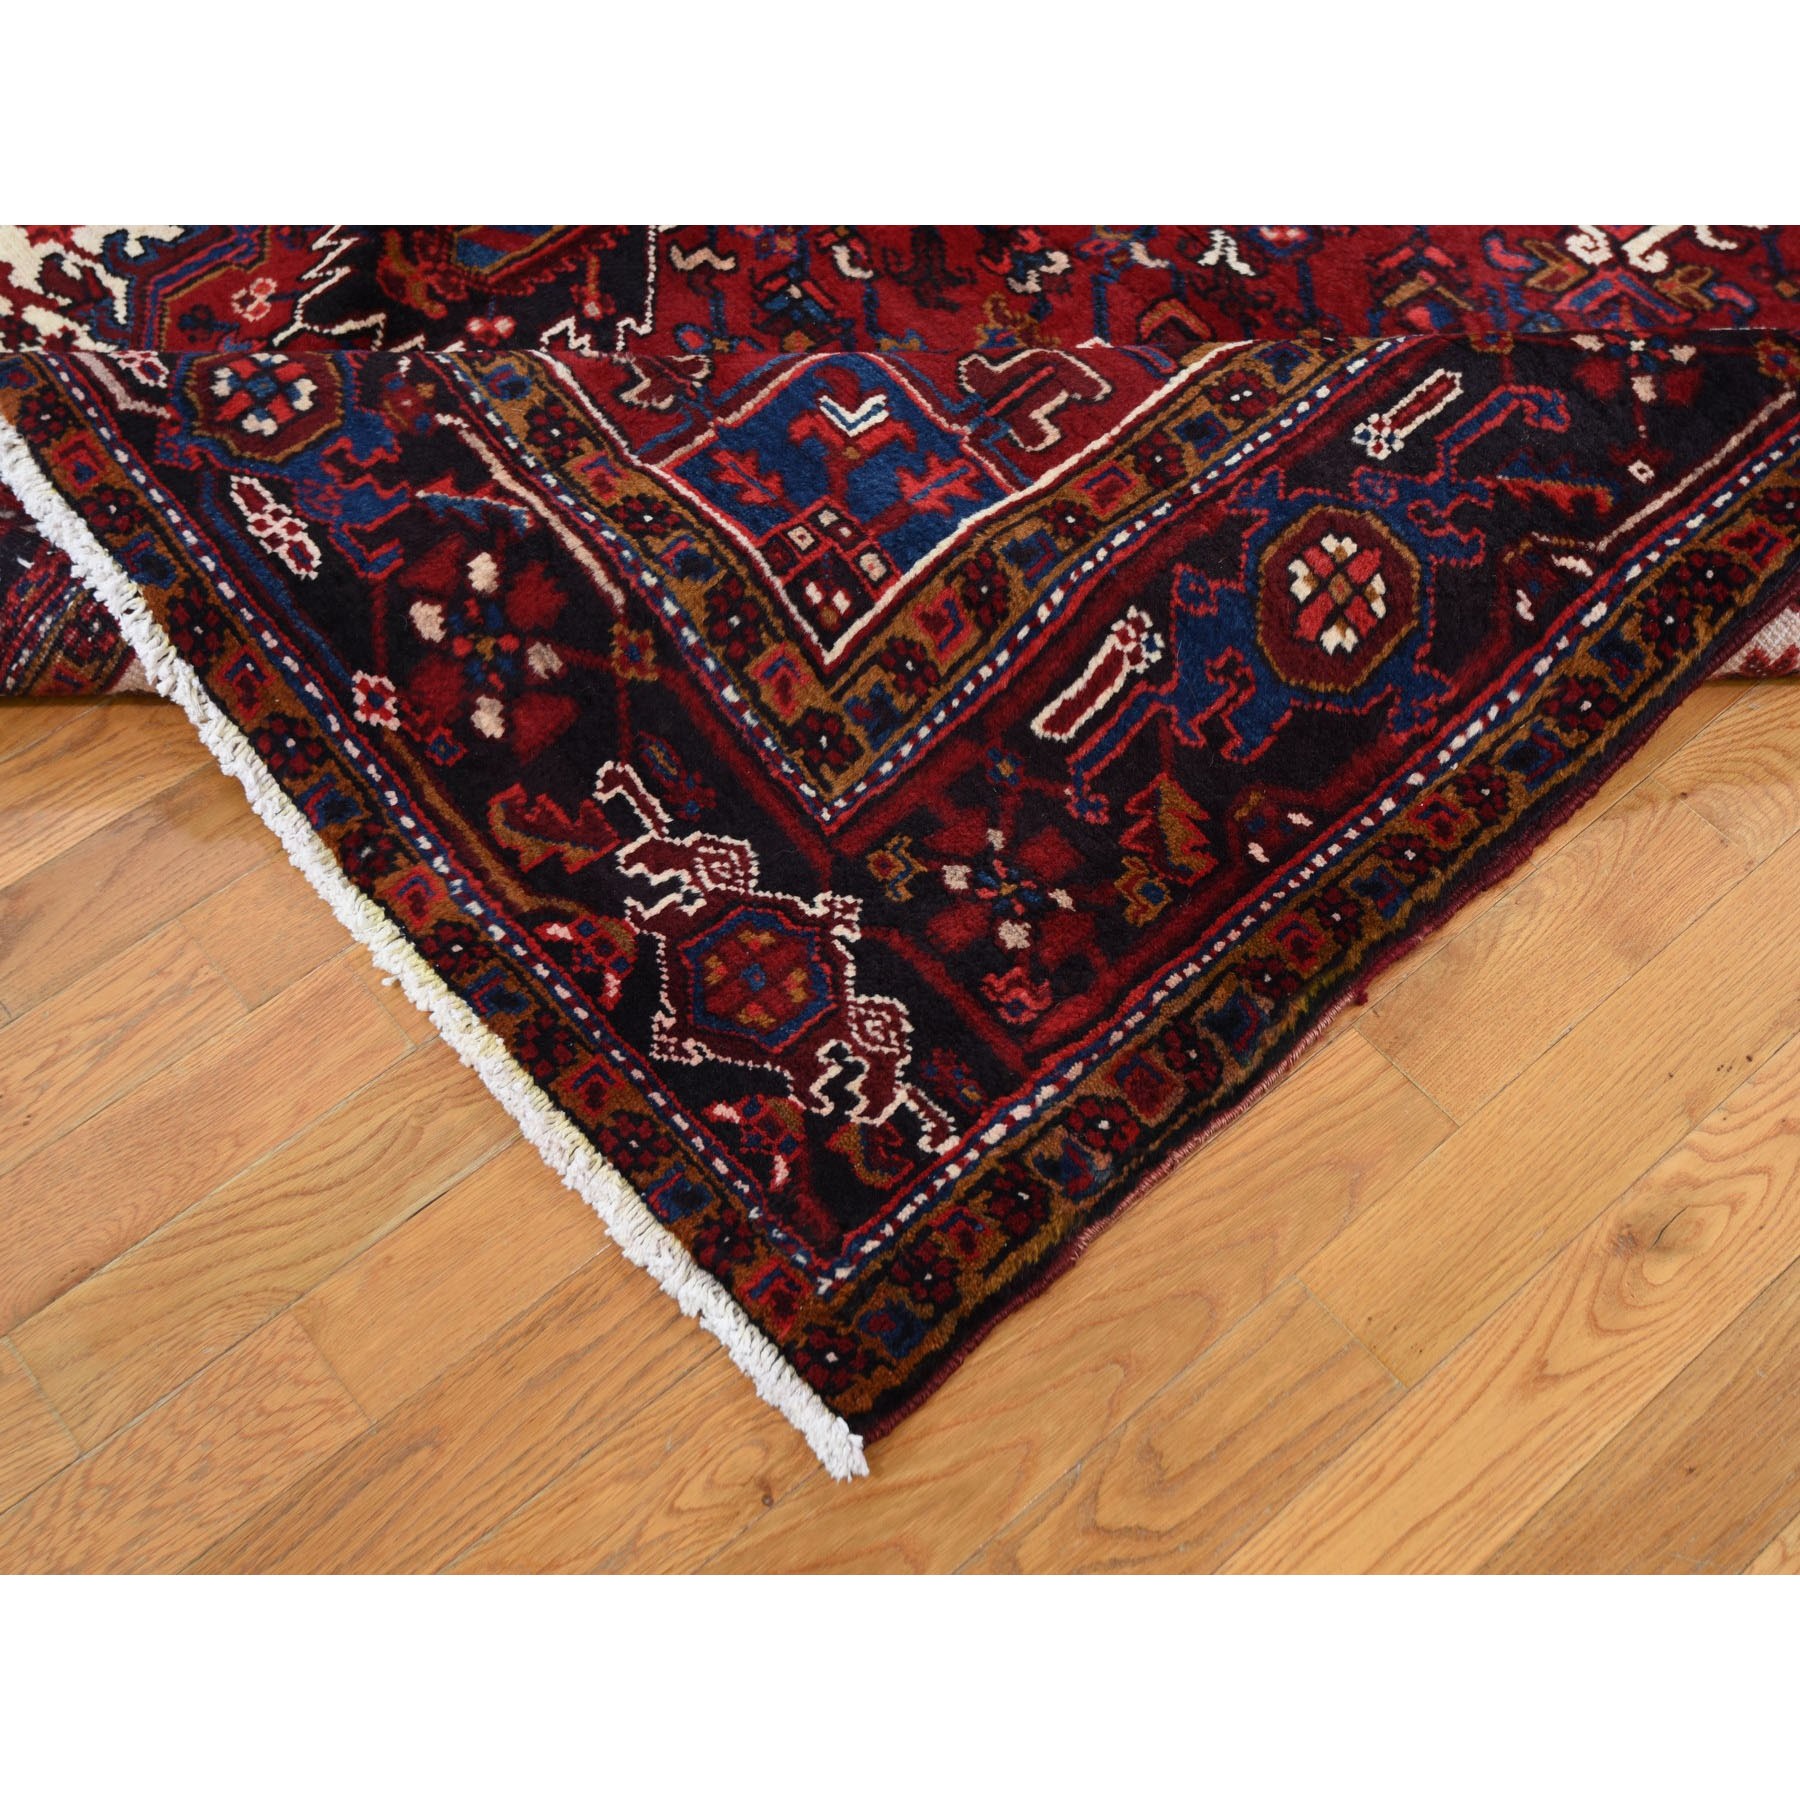 8-x10-10  Red Semi Antique Persian Heriz Geometric Design Thick and Plush Hand Knotted Oriental Rug 